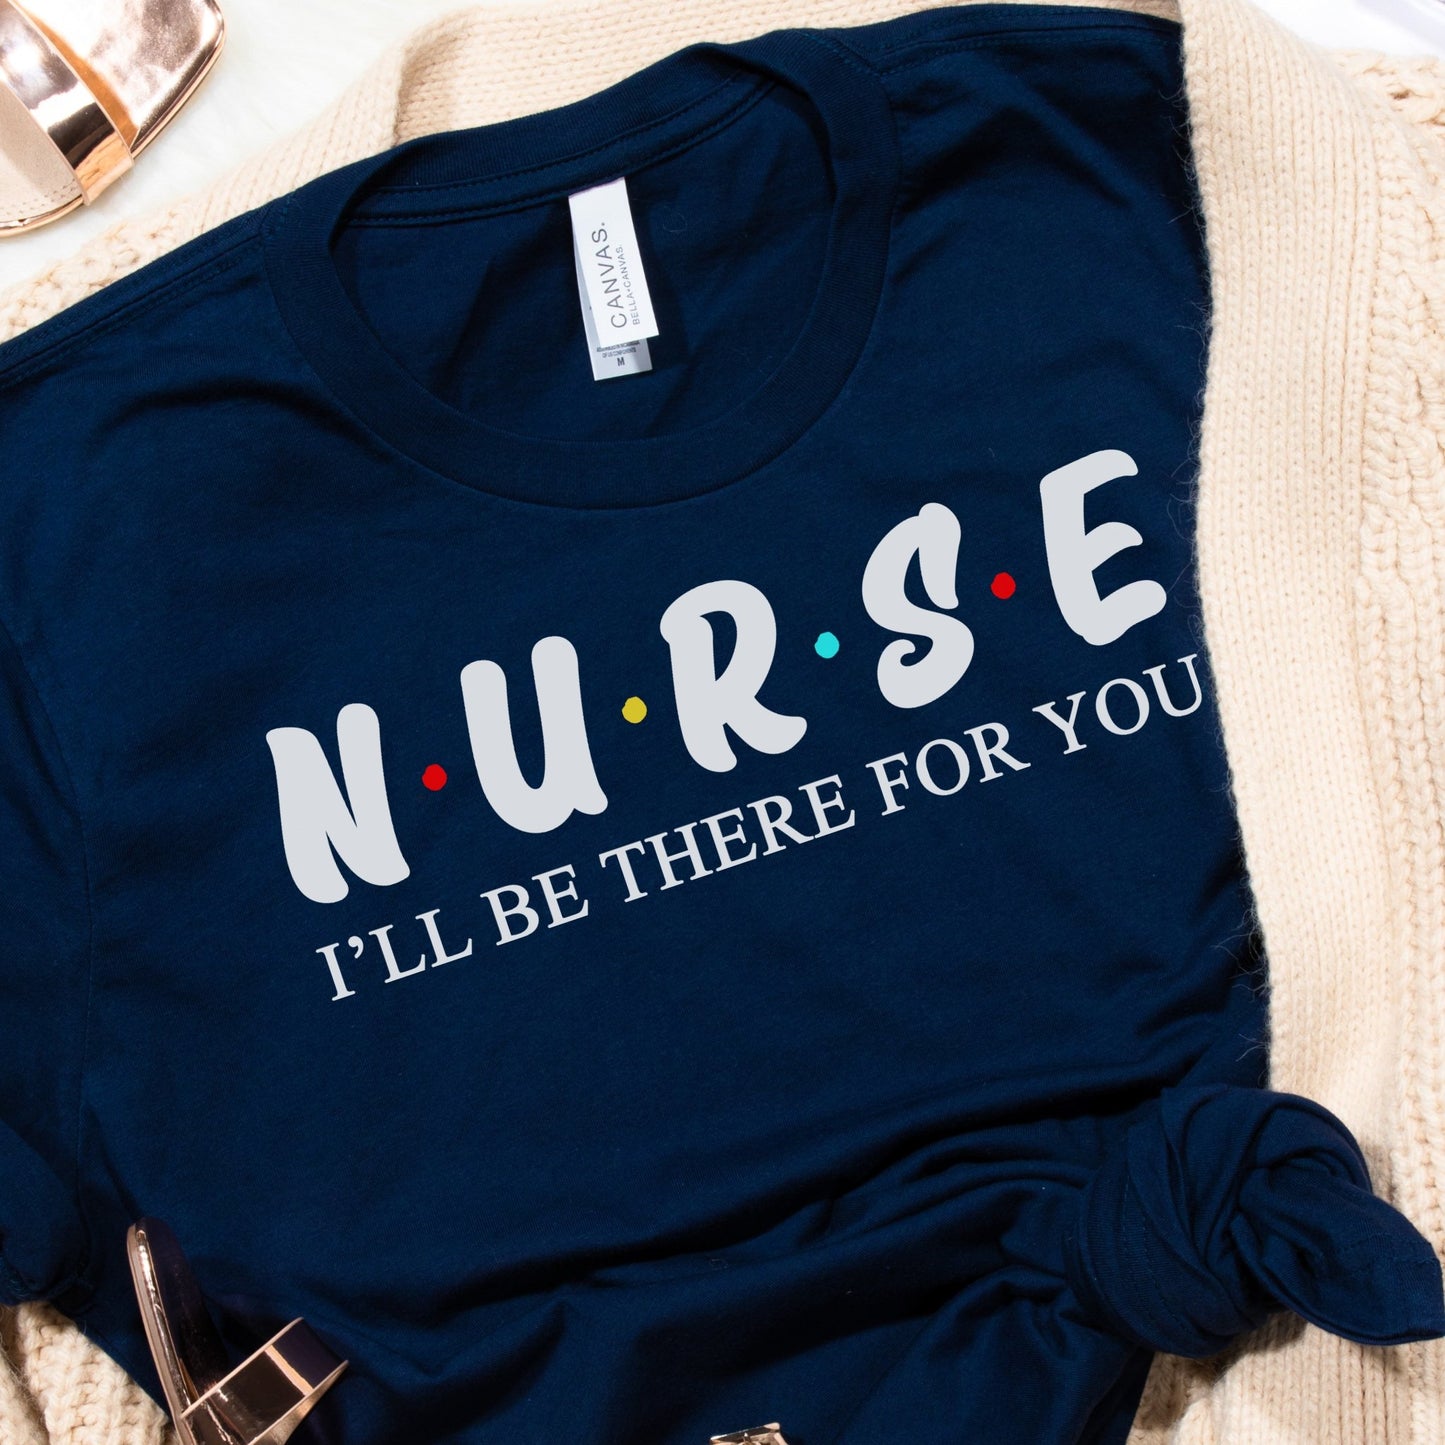 Gifts for nurses